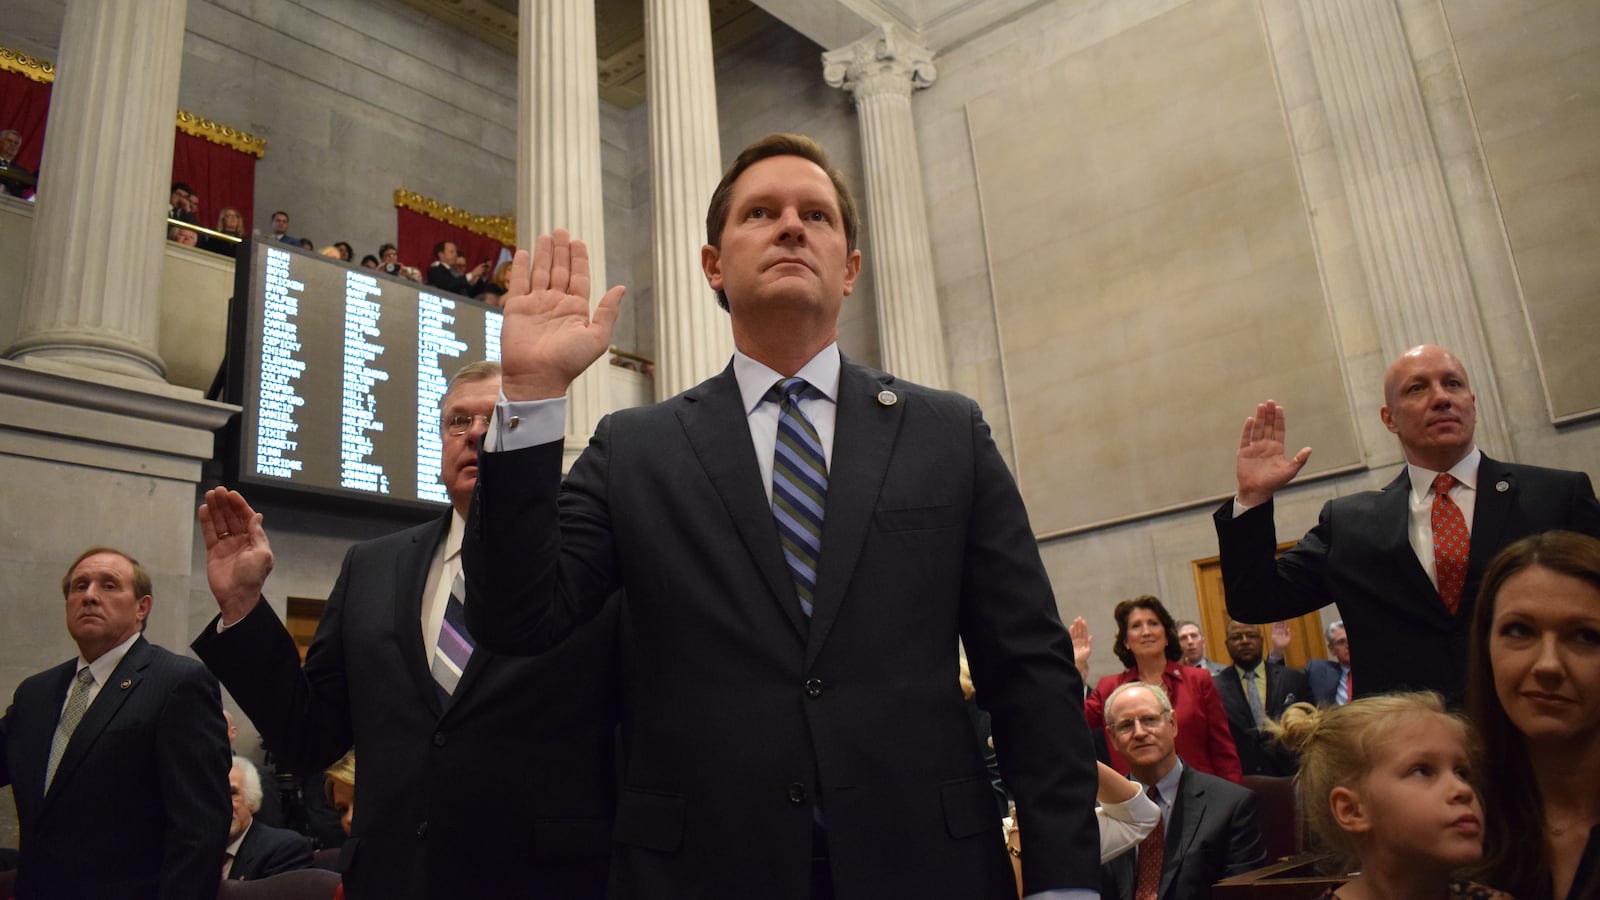 Rep. Cameron Sexton takes the oath of office on the first day of the 111th Tennessee General Assembly in January. On Friday, the Crossville Republican was elected the new leader of the House of Representatives during a special legislative session ordered by Gov. Bill Lee. (Photo courtesy of the House Republican Caucus)